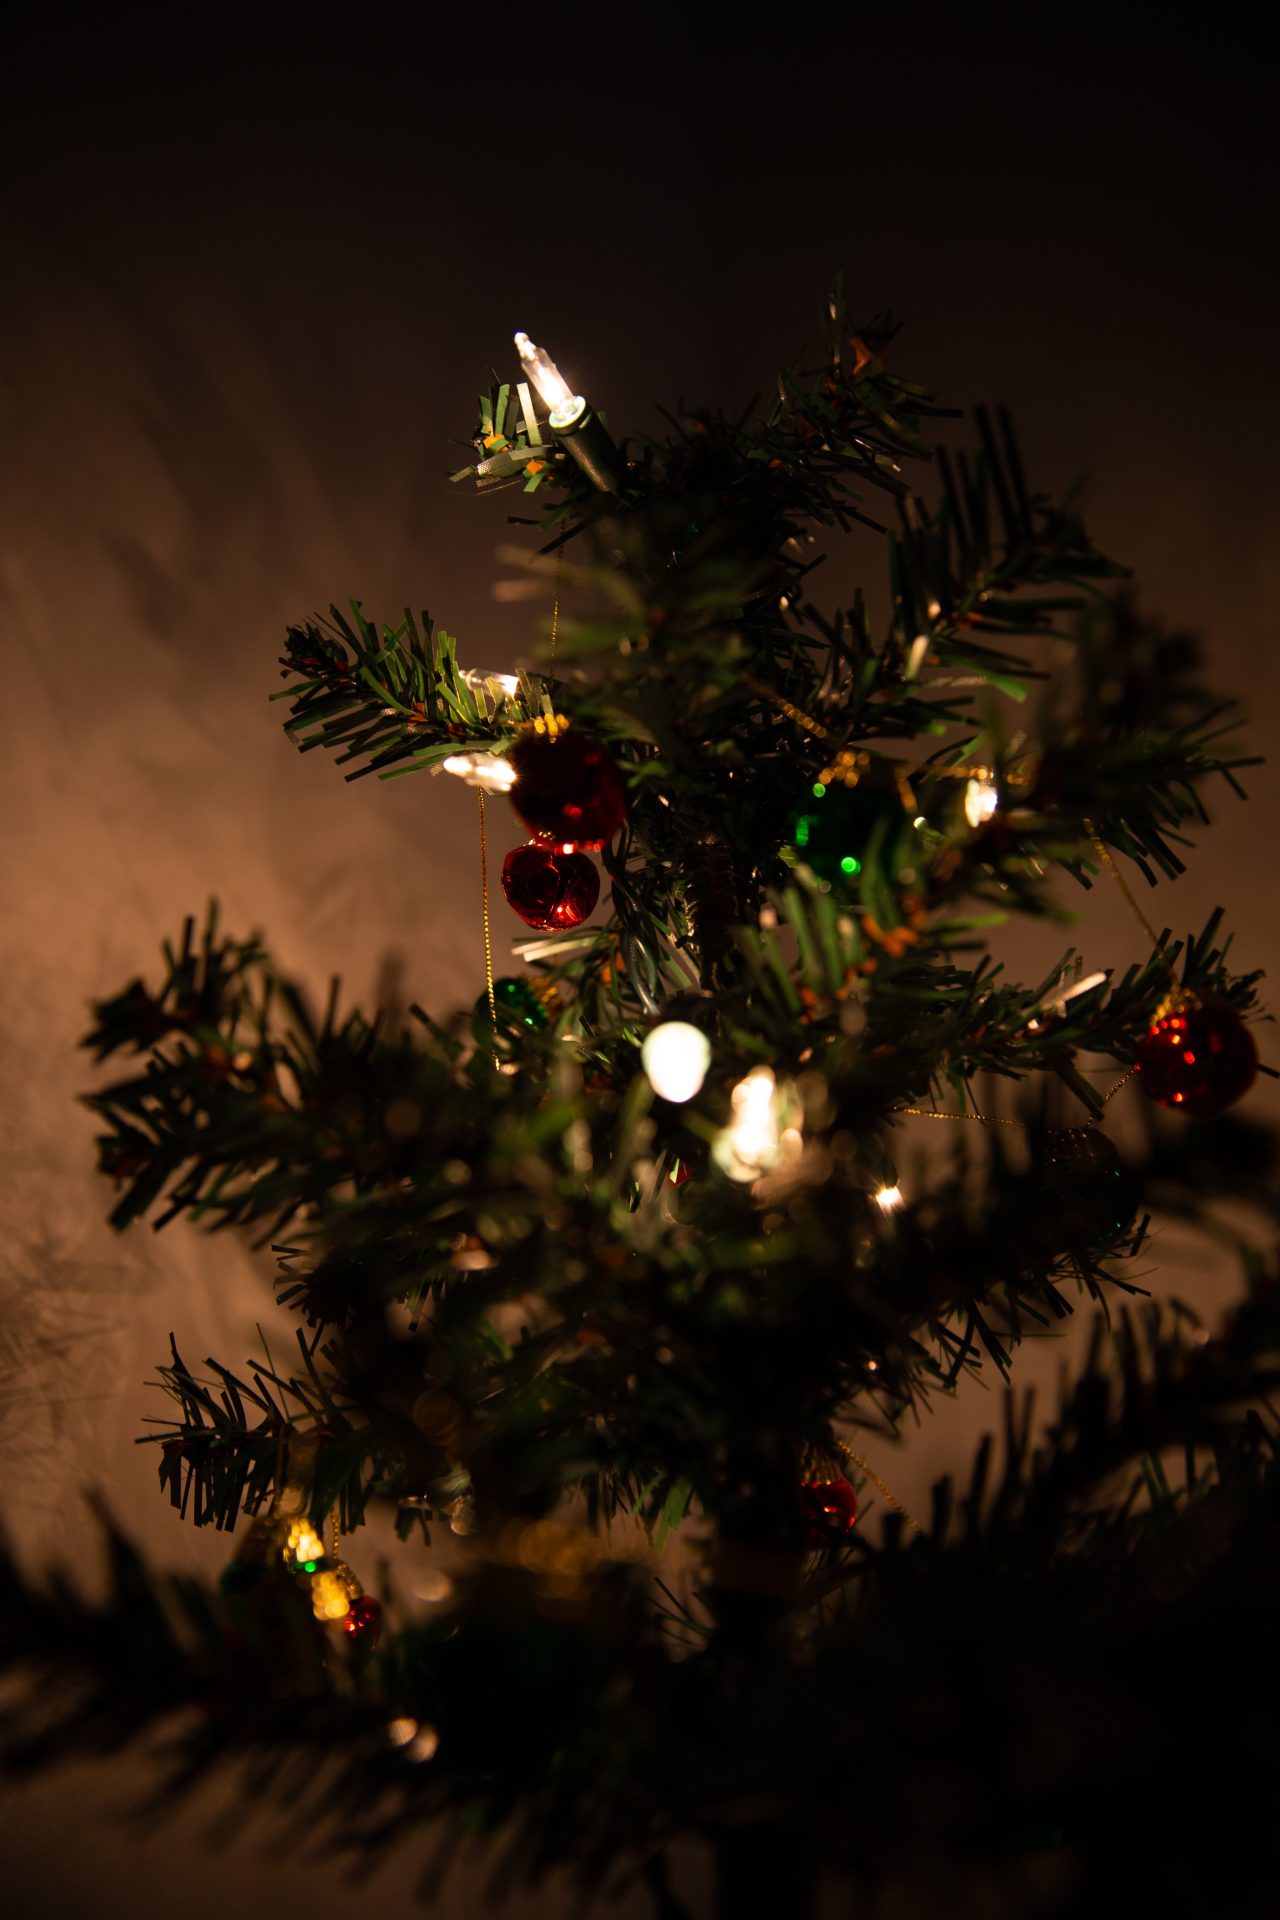 Photo shows the $1 Christmas tree decorated with string lights and tiny ornaments.